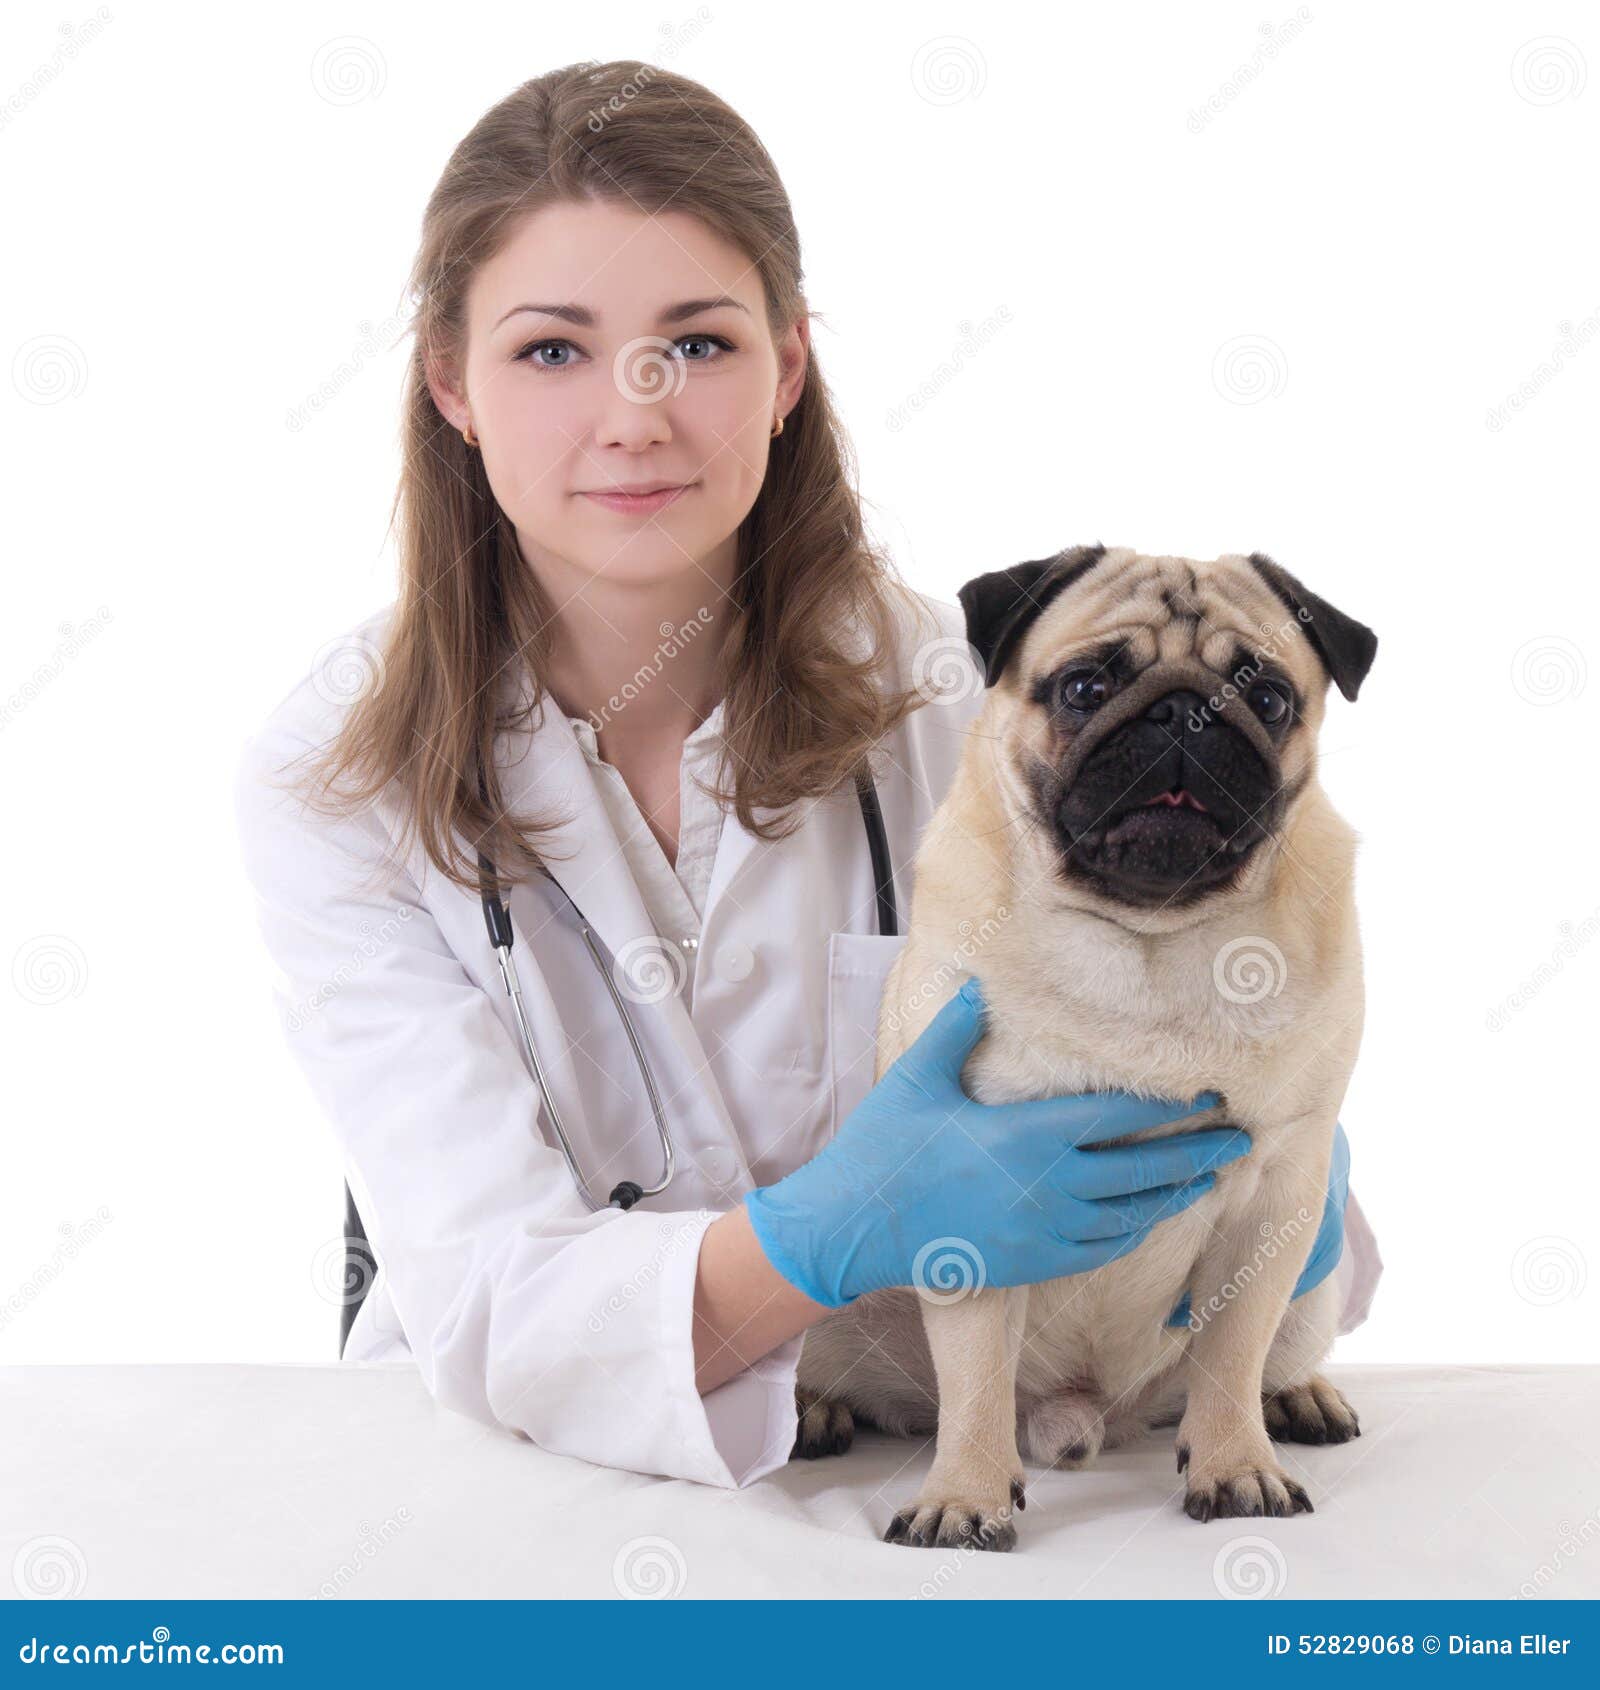 happy-young-woman-vet-doctor-pug-dog-isolated-white-background-52829068.jpg